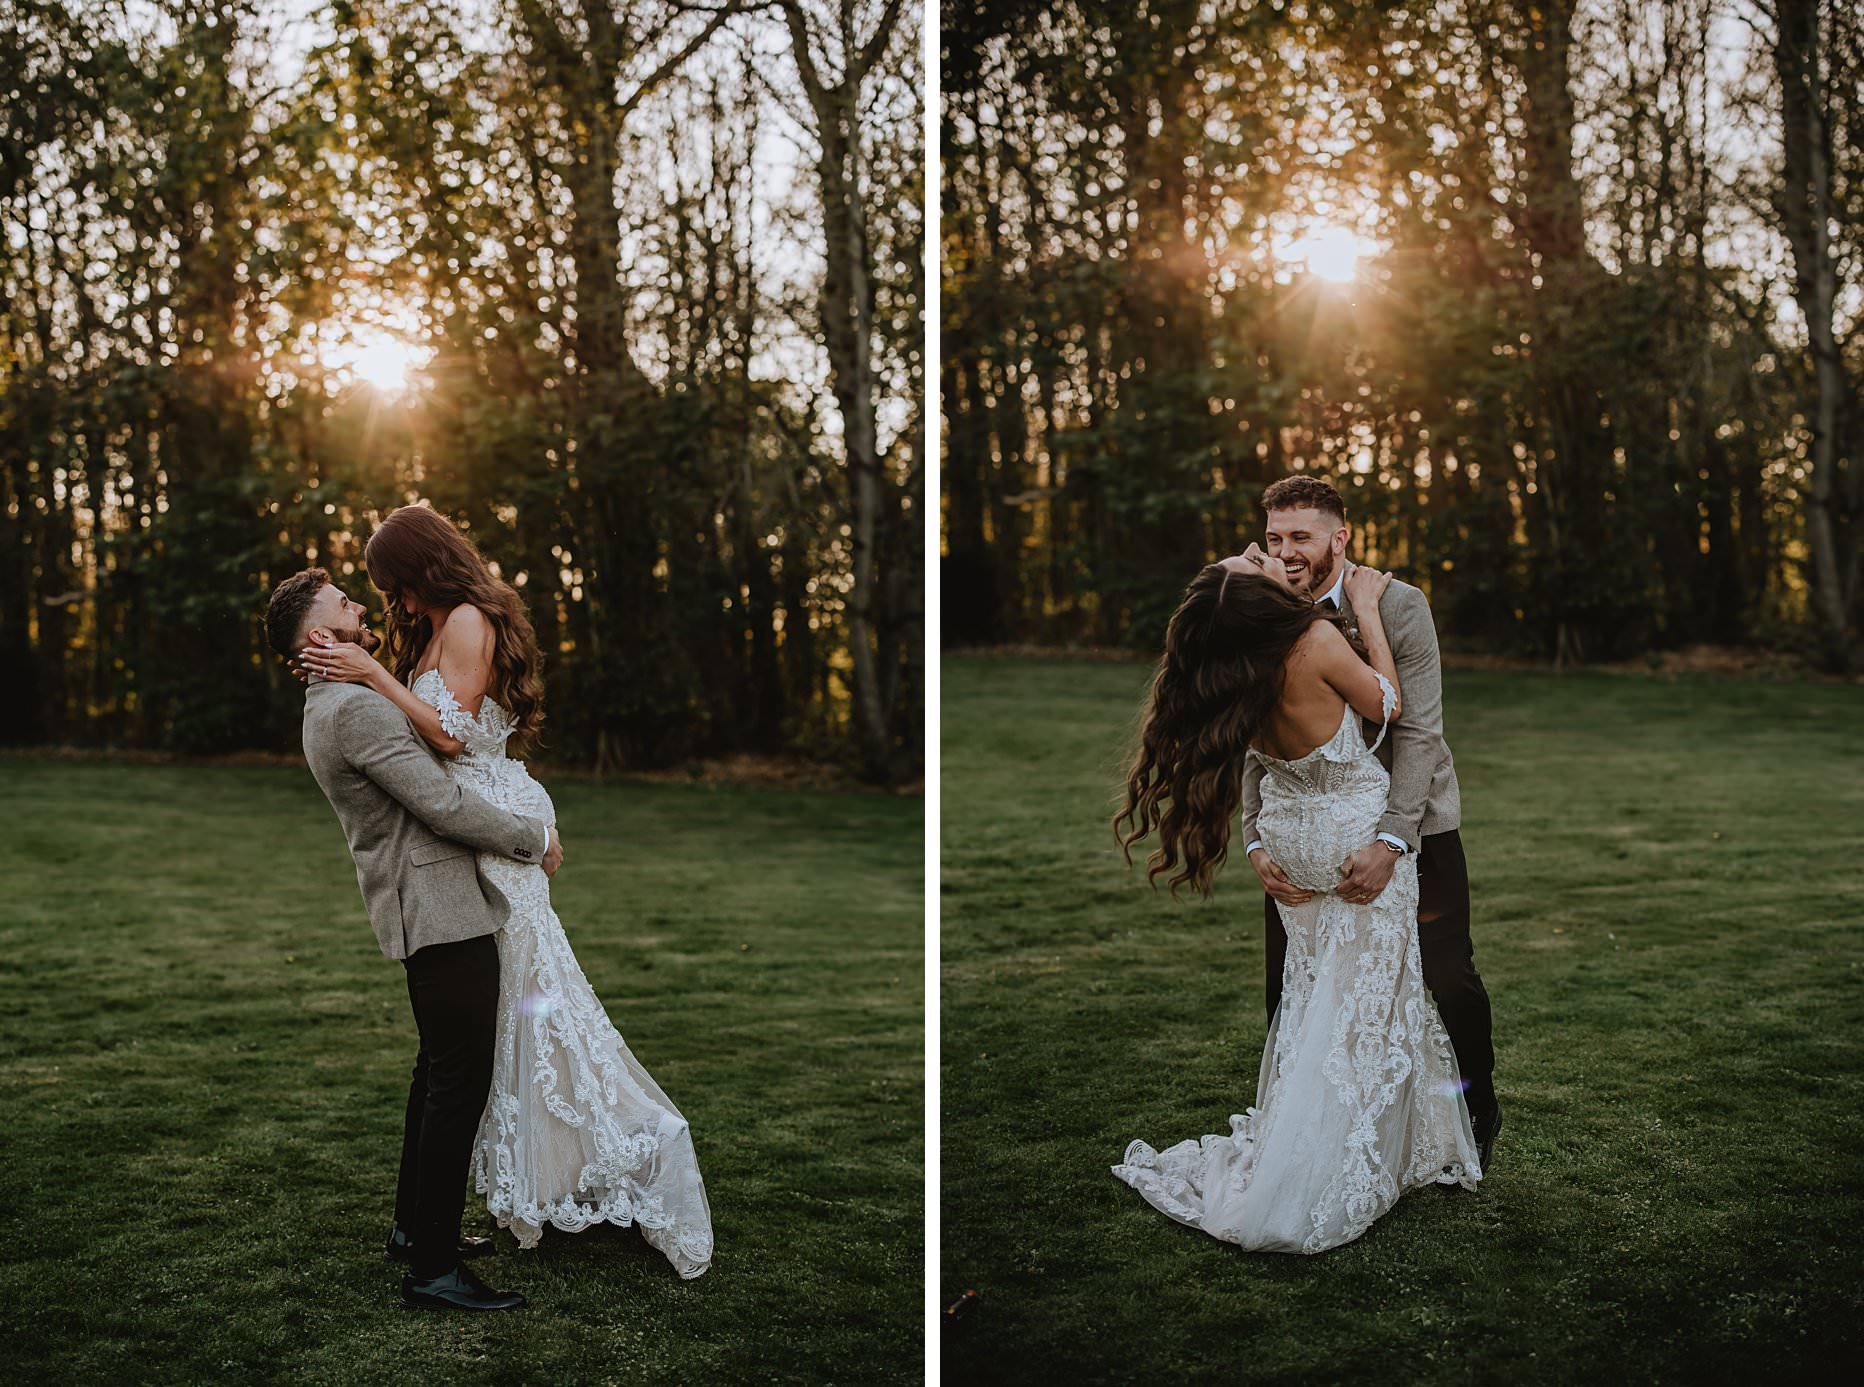 Groom holding bride up and spinning her around in the sunset. Bride is throwing her head back and laughing. 